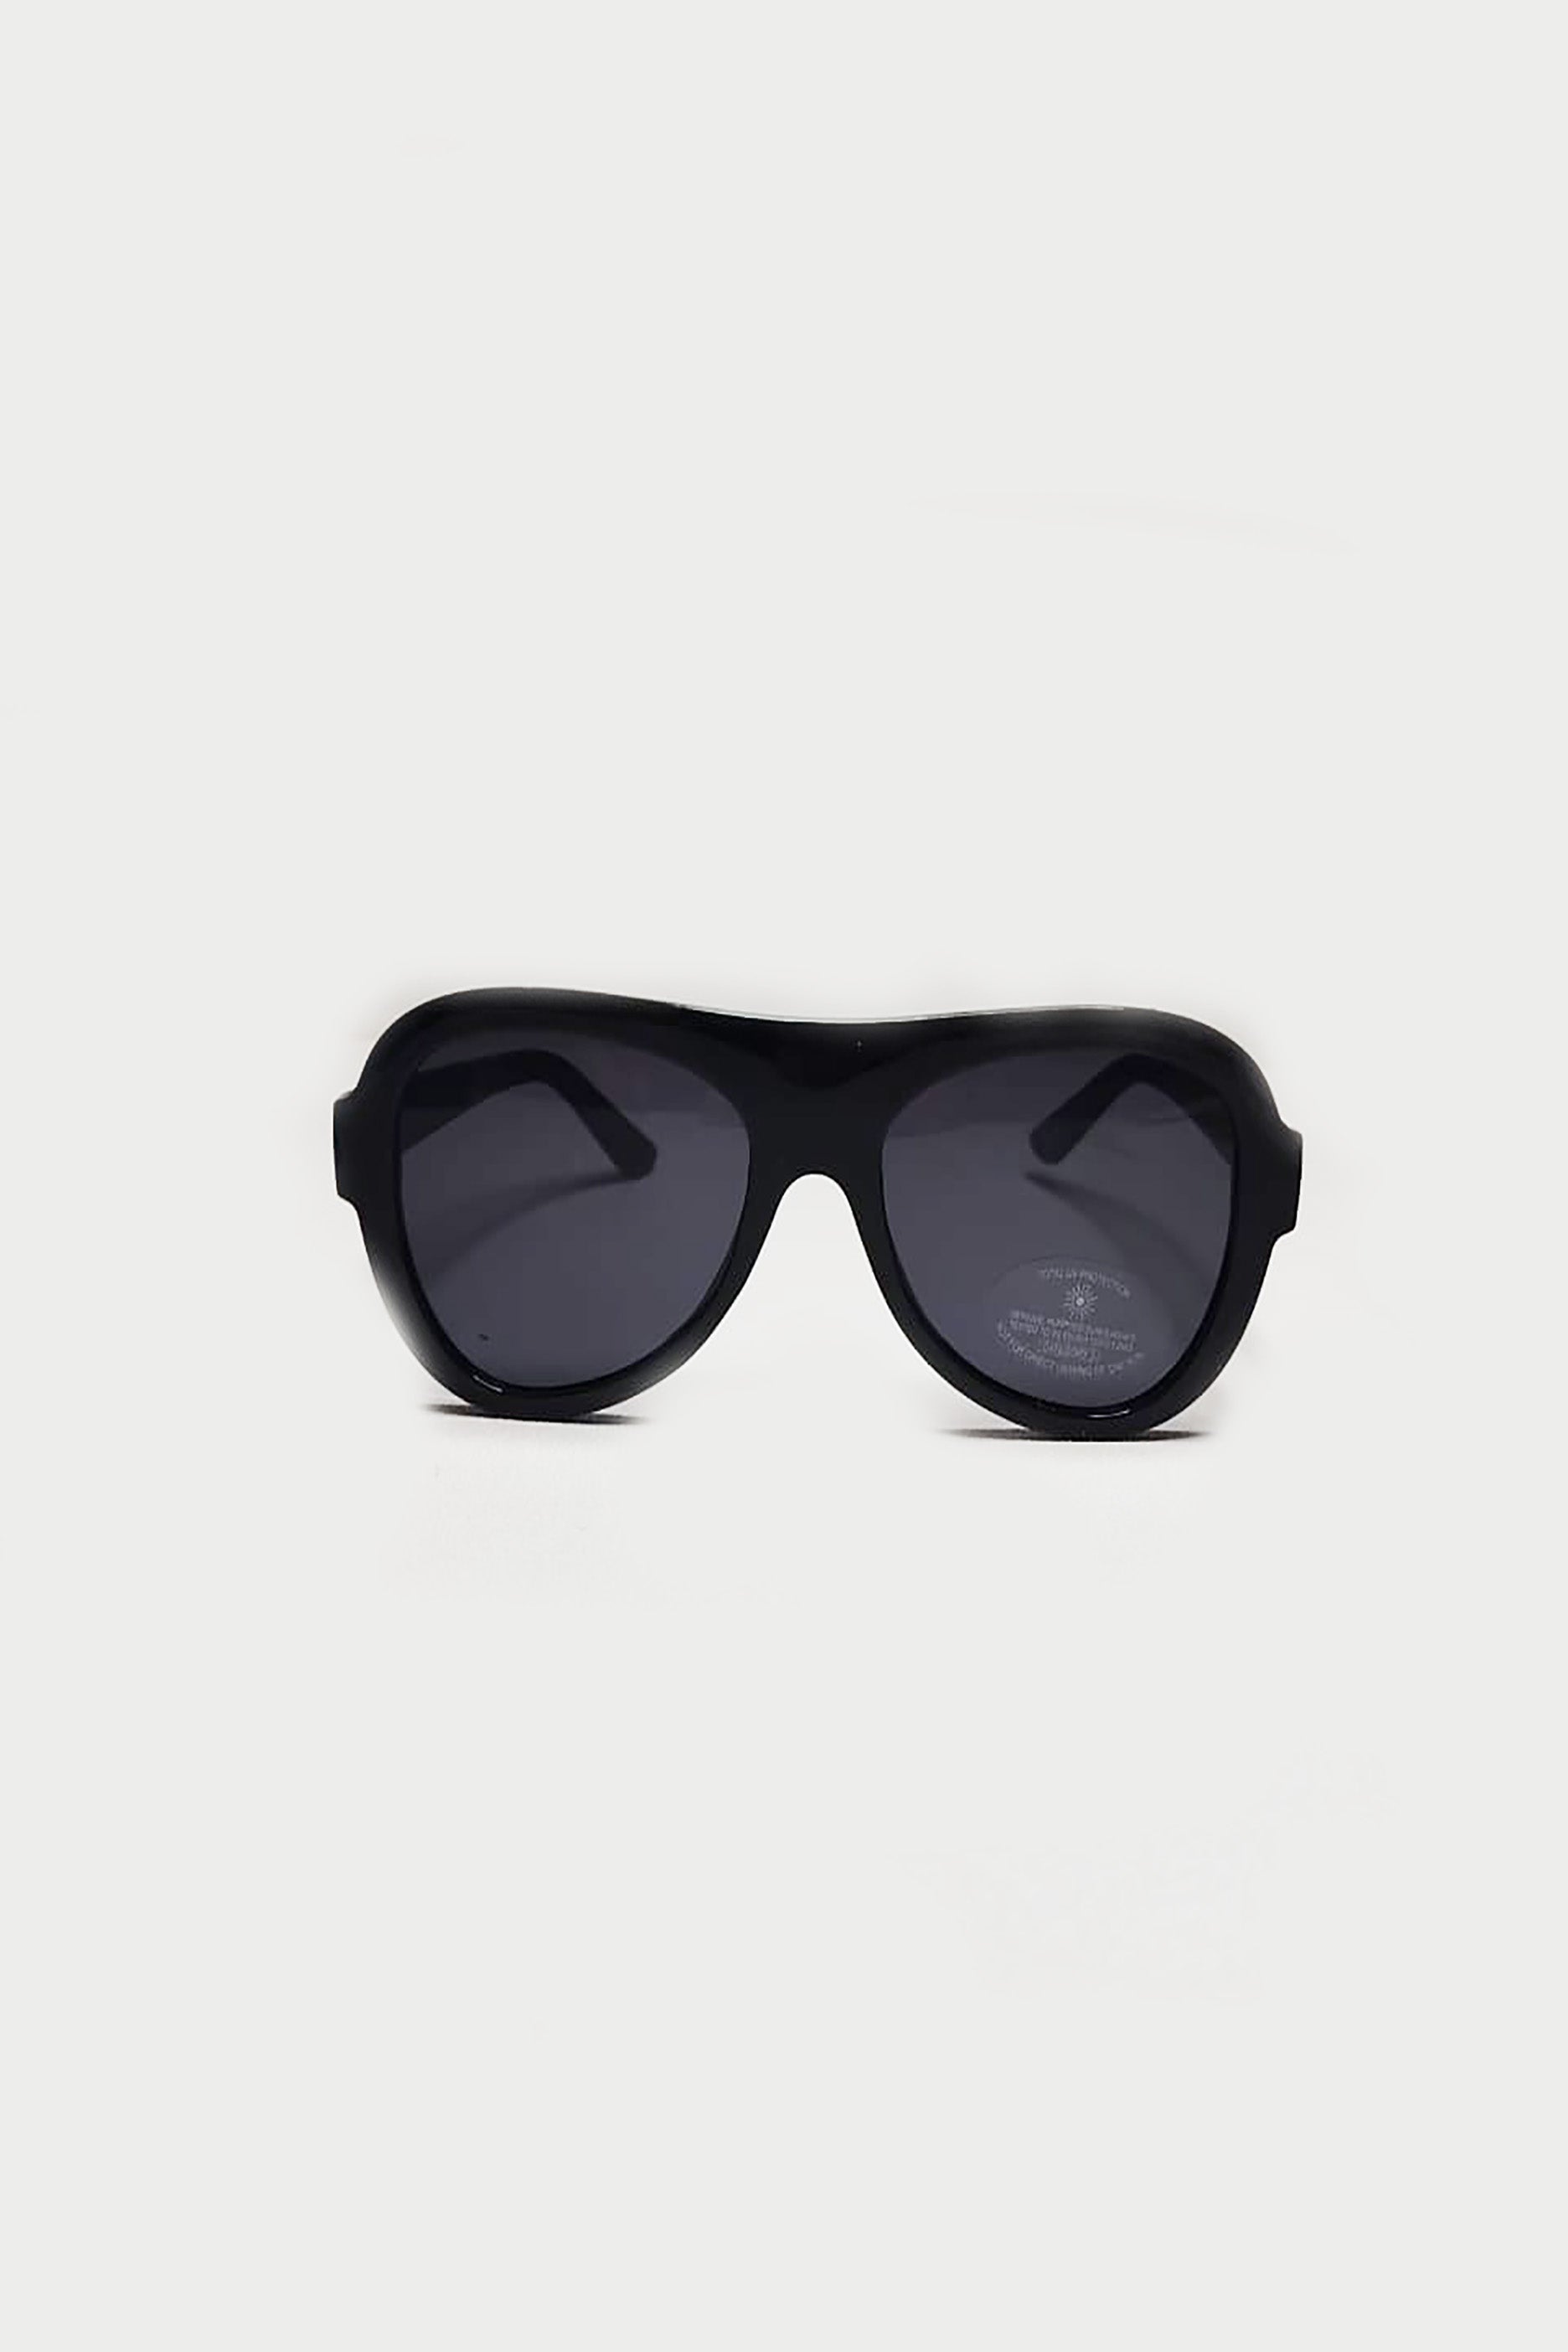 Oversized Black Frame Sunglasses with Black Tinted